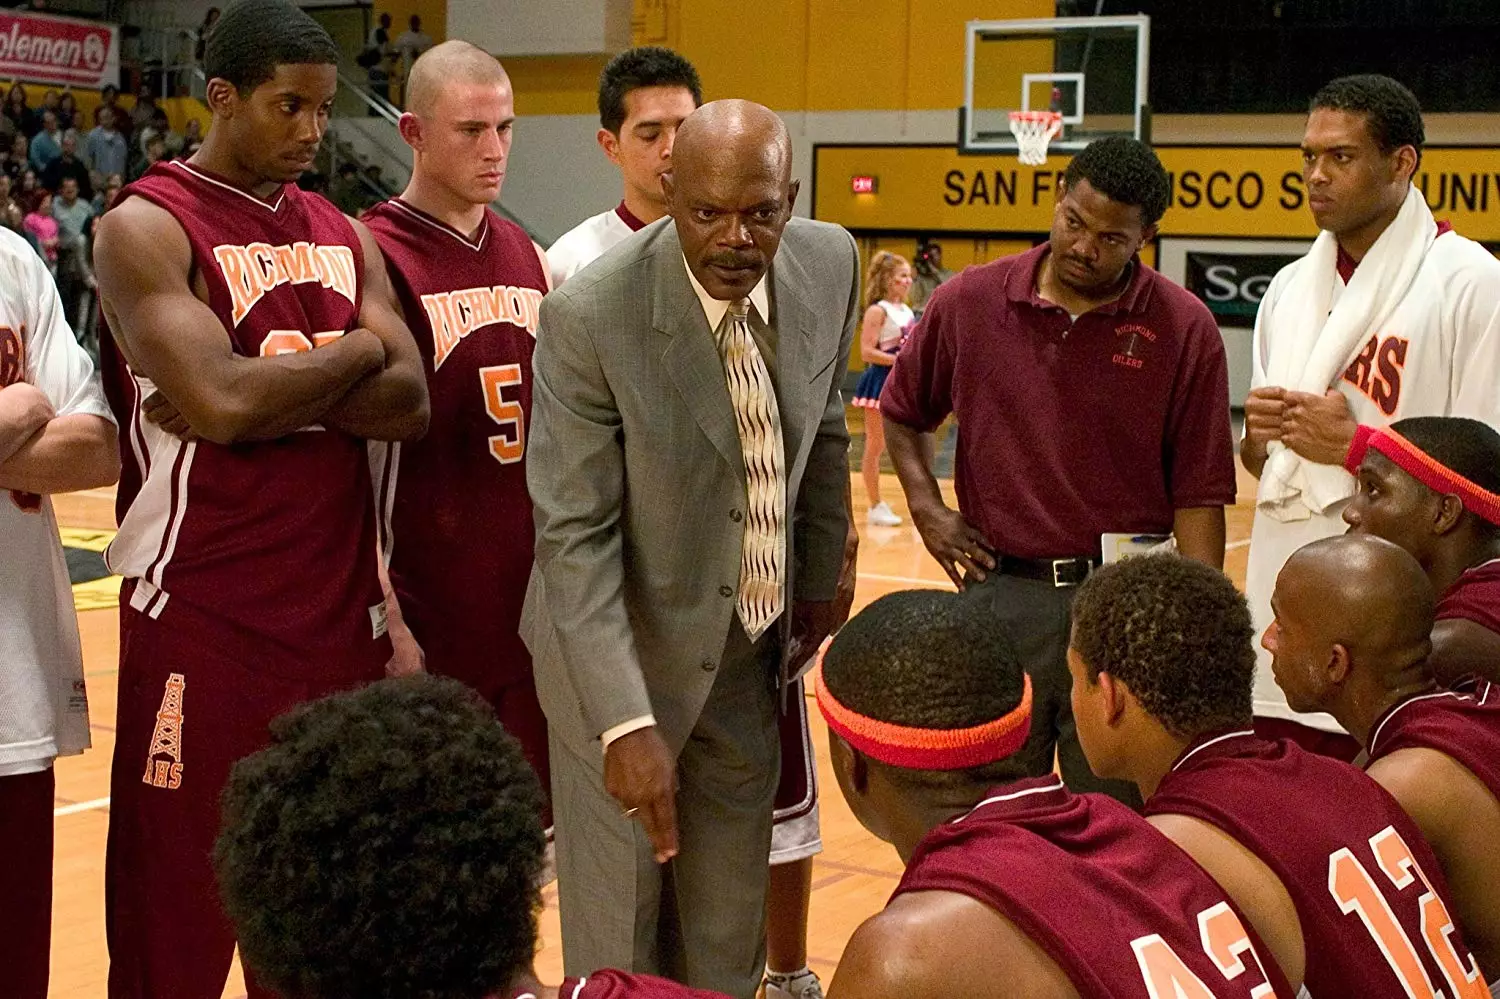 The 'Deepest Fear' Speech From Coach Carter Is A Reminder Of How Powerful Sport Is